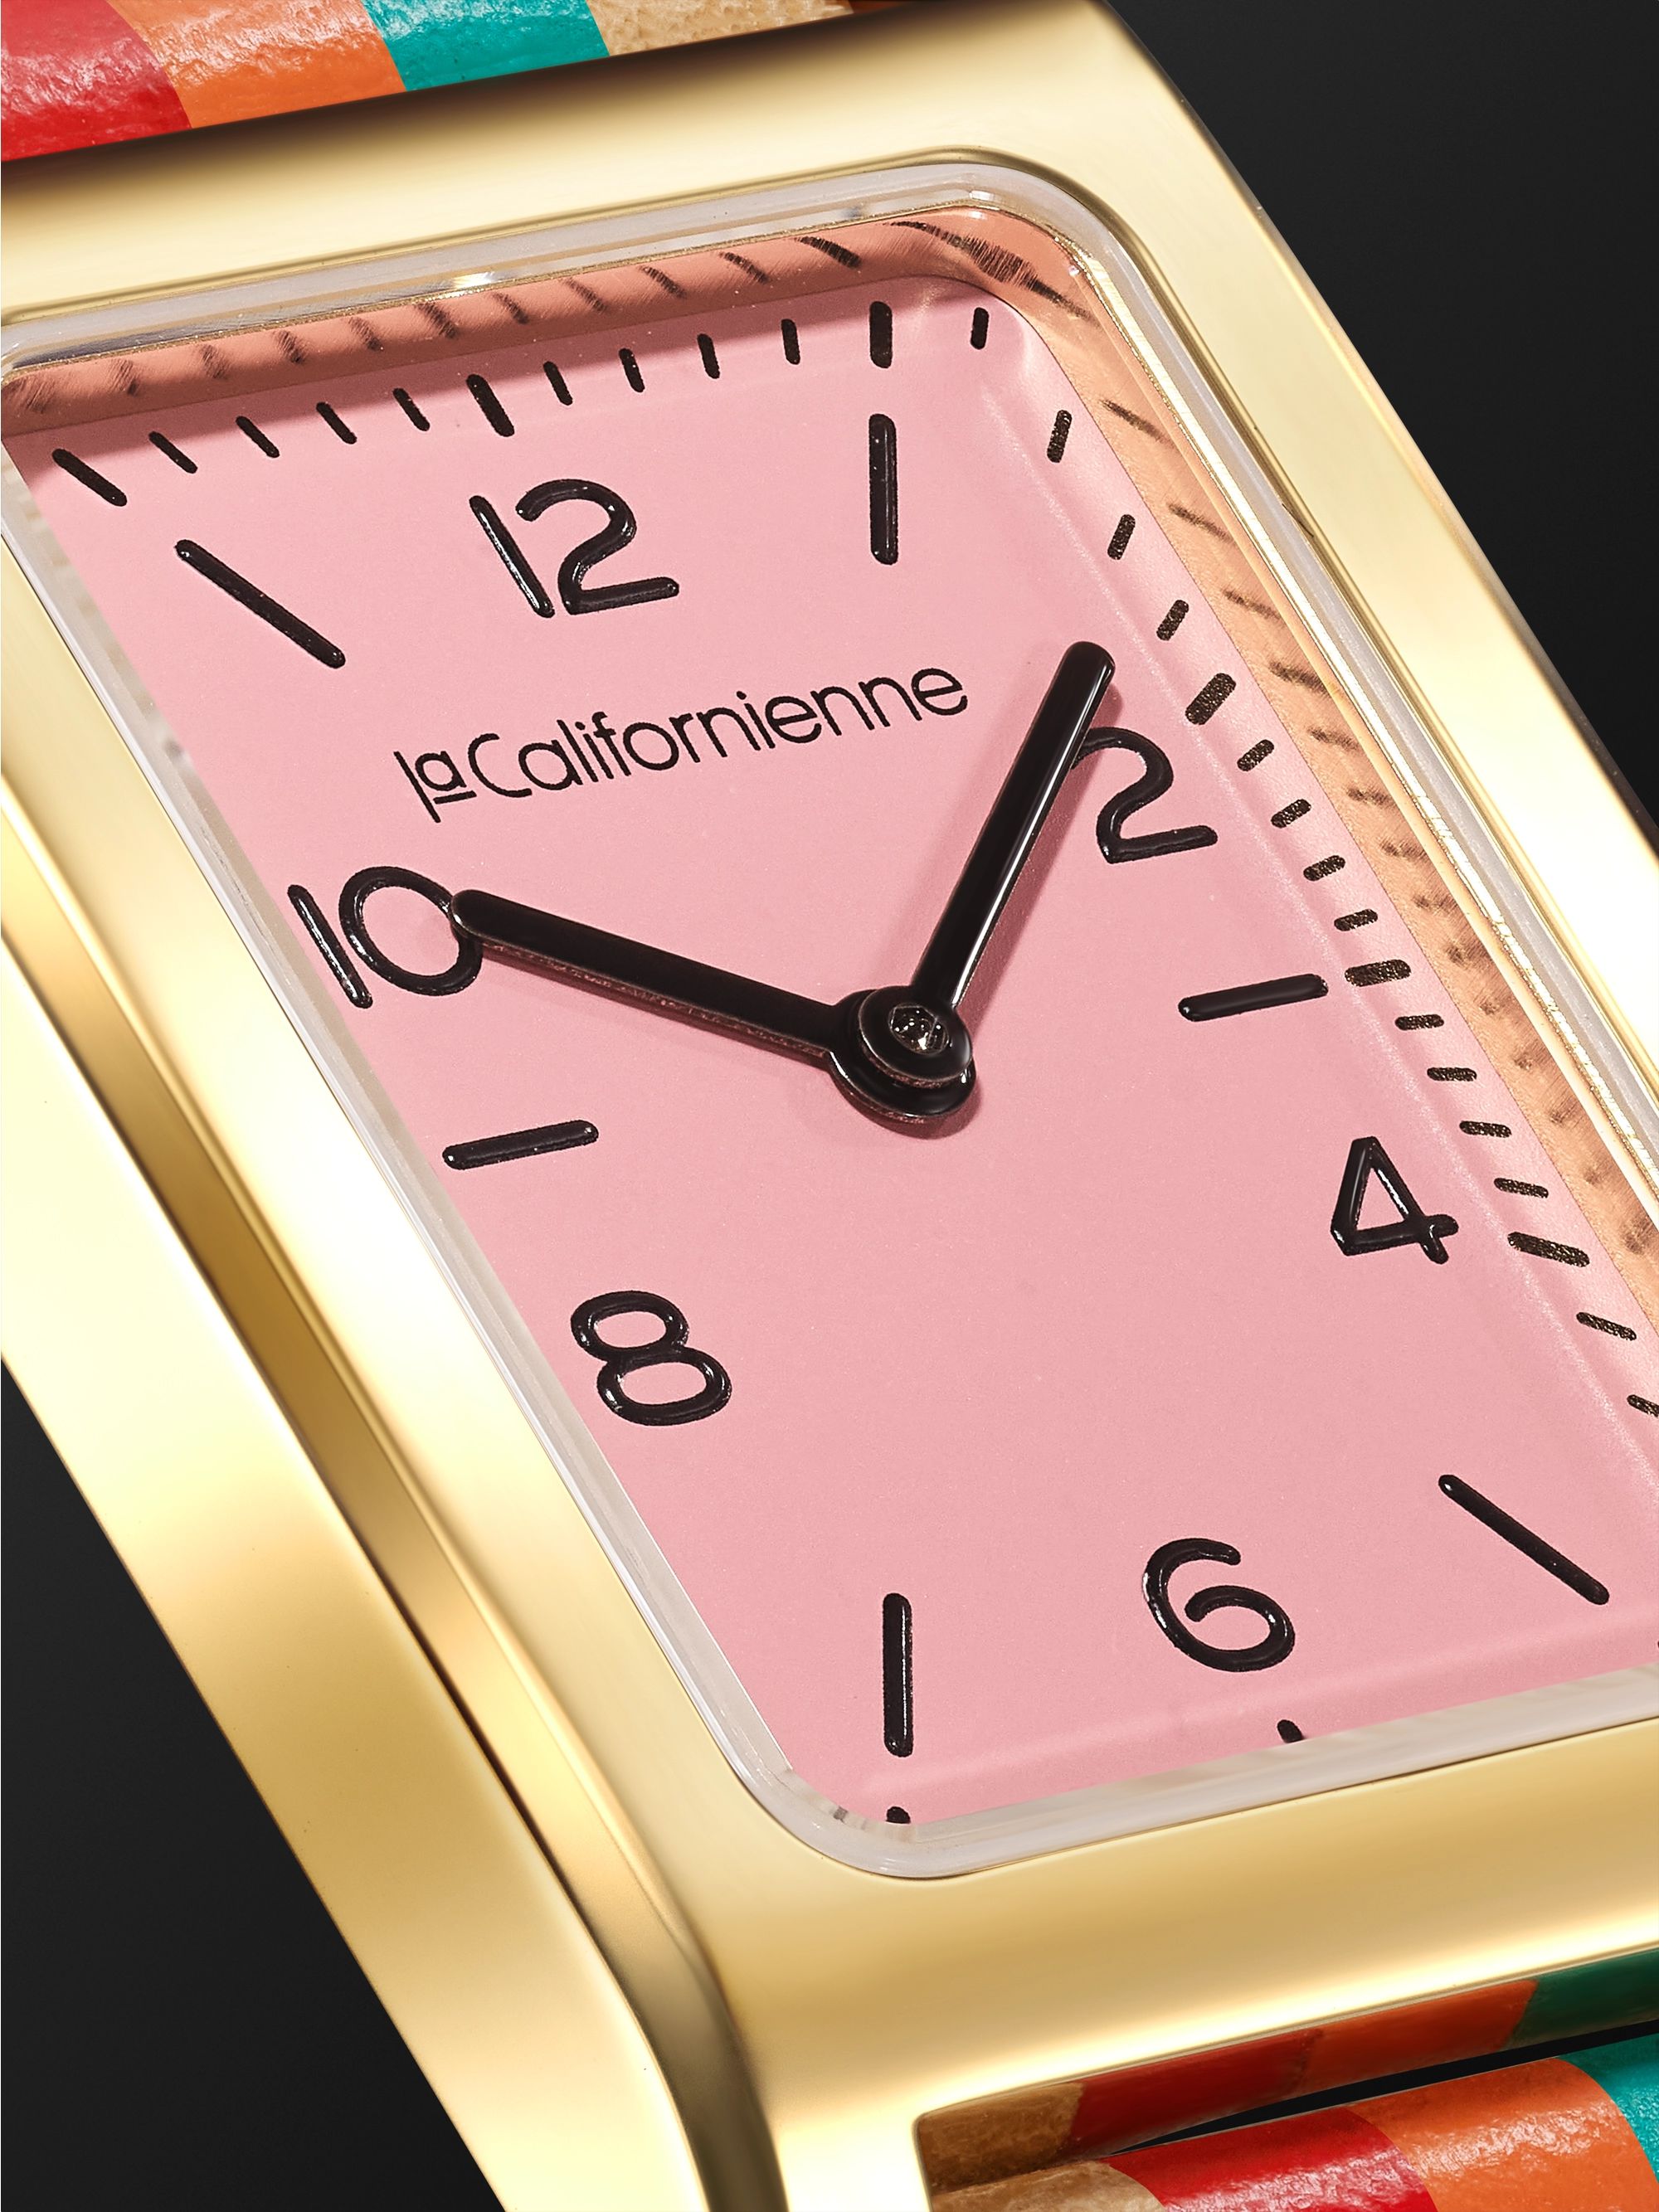 LA CALIFORNIENNE Daybreak 24mm Gold-Plated and Leather Watch, Ref. No. DB-09 YG TERR